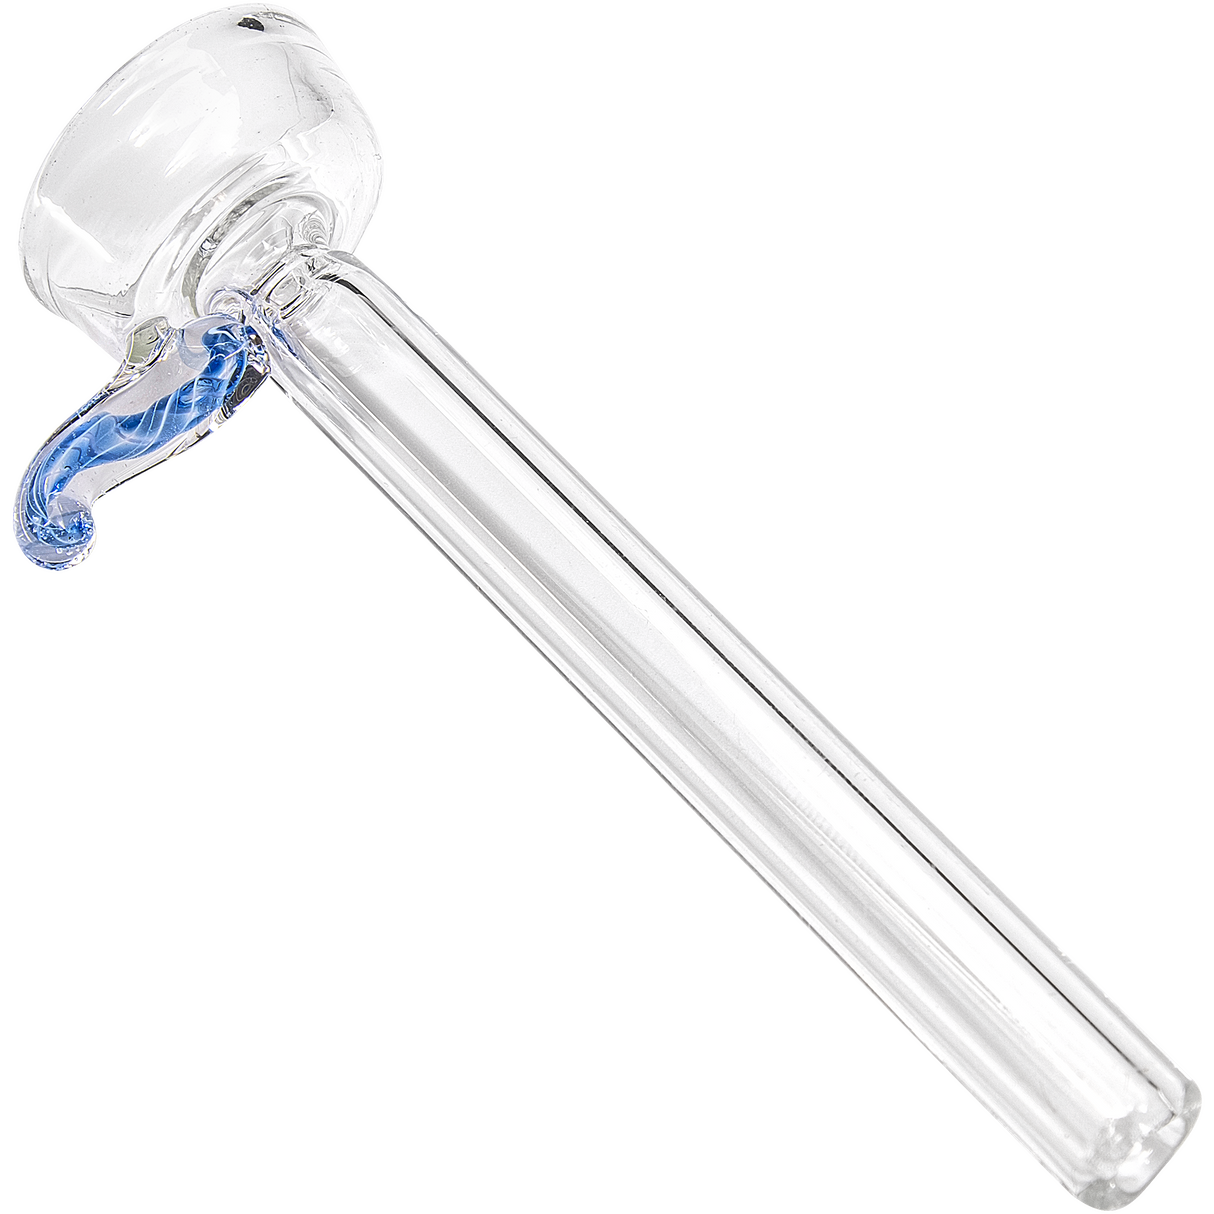 LA Pipes 9mm clear funnel slide bowl with blue handle for bongs, side view on white background